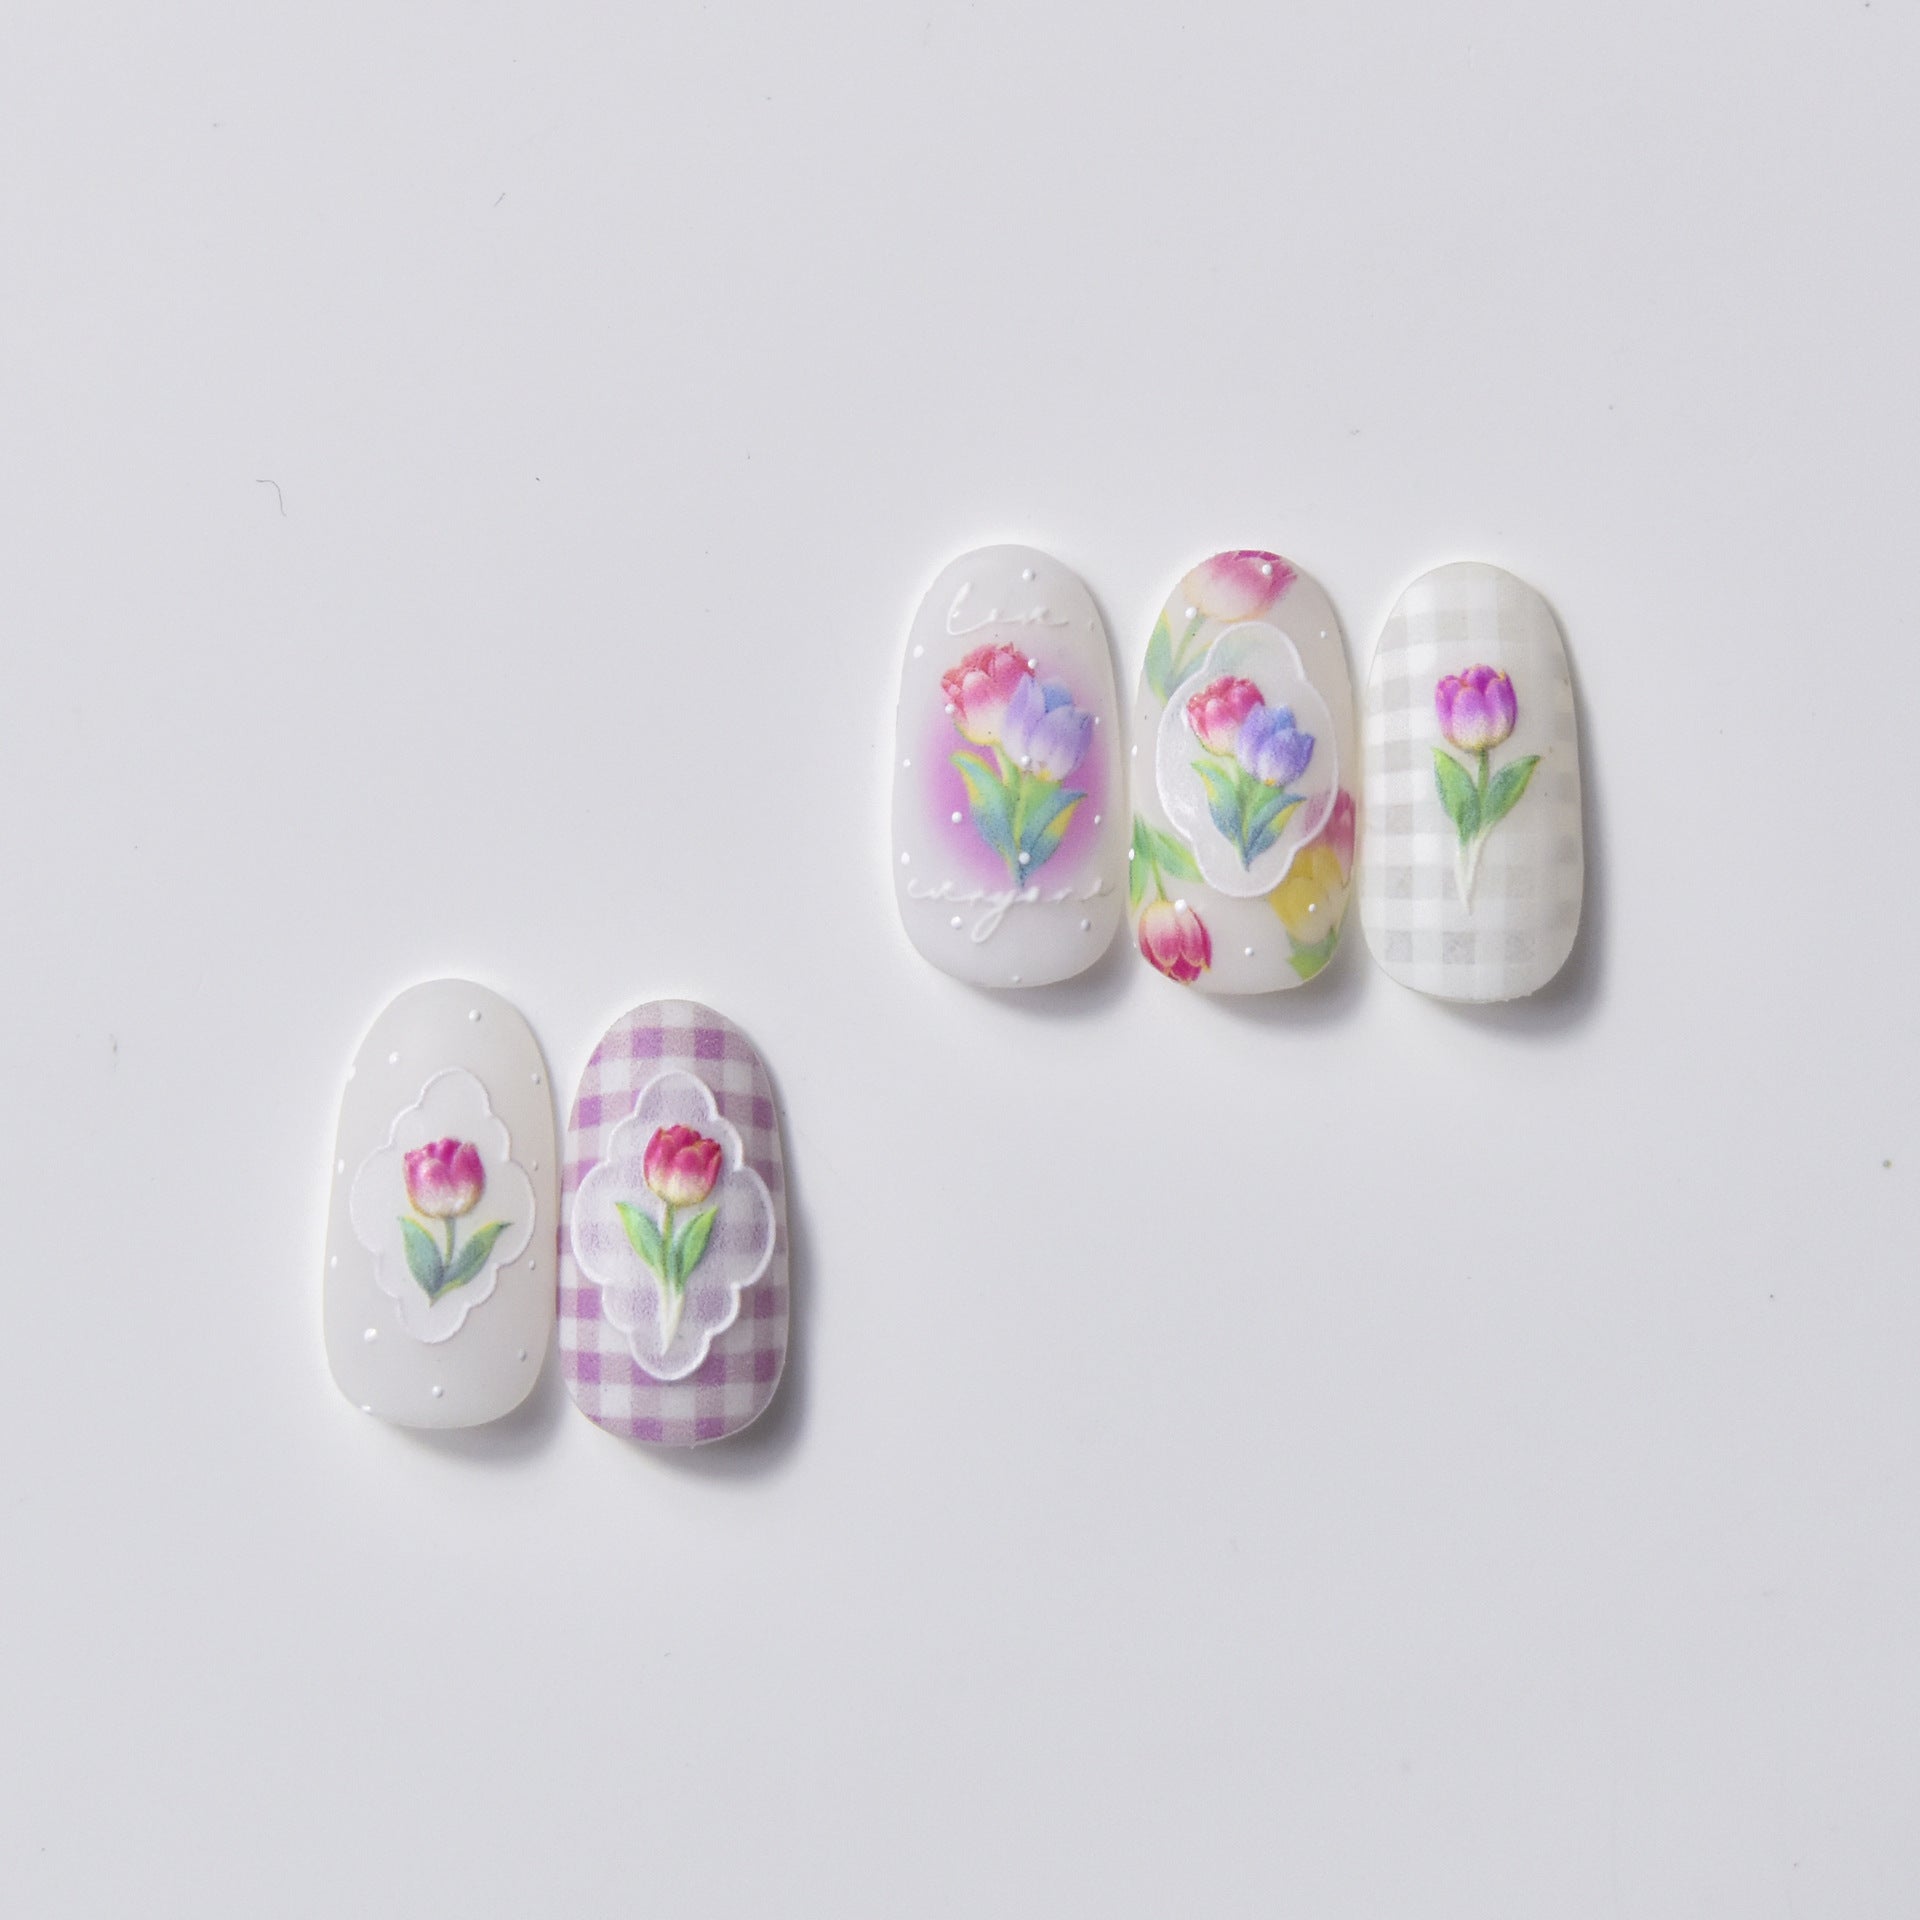 NailMAD Gradient Tulip Nail Art Stickers Adhesive Embossed Daisy Flower Sticker Decals to3097